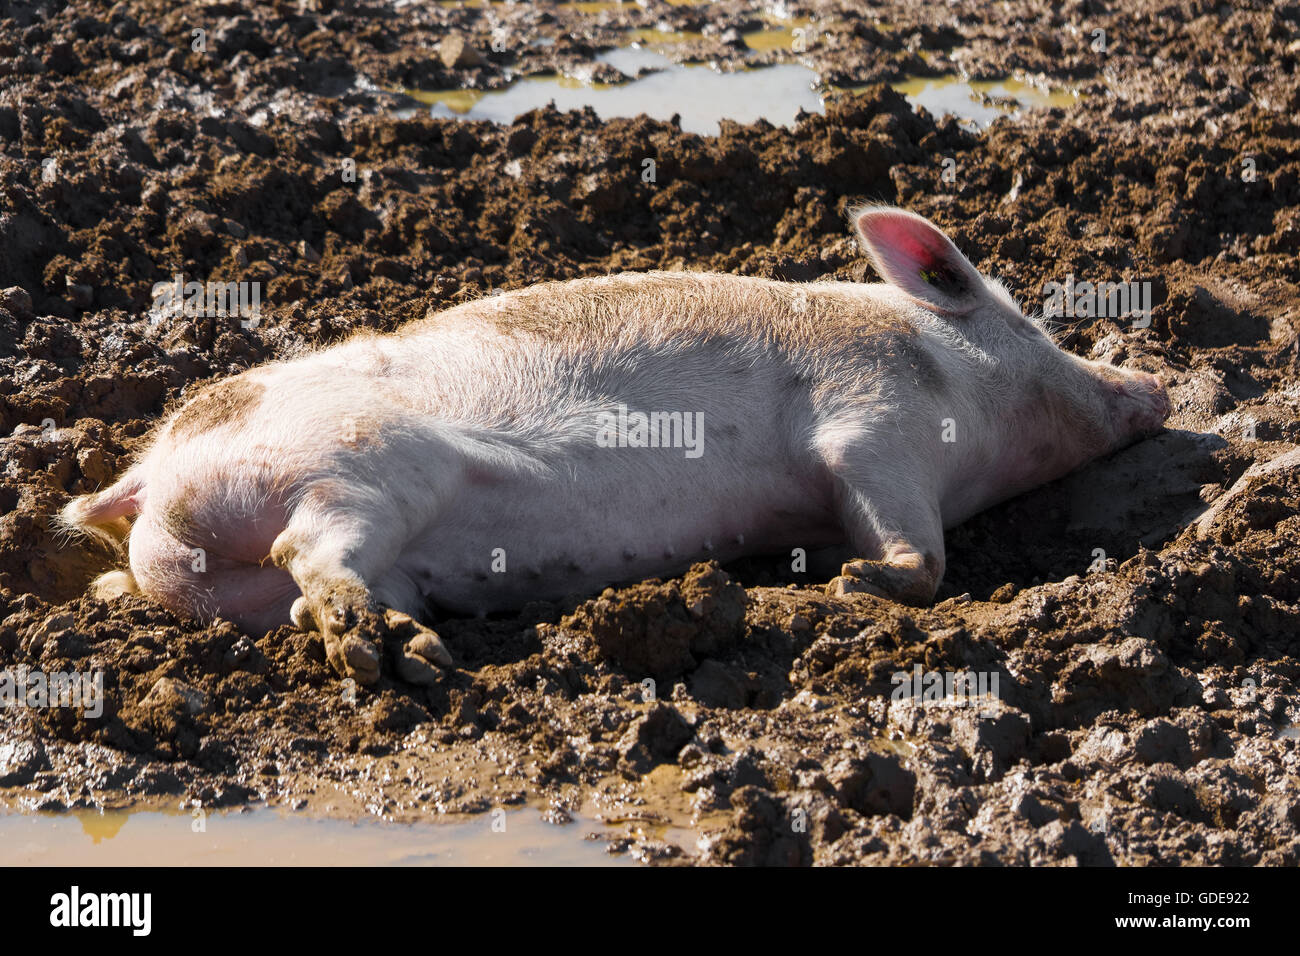 Wallowing pig Stock Photo